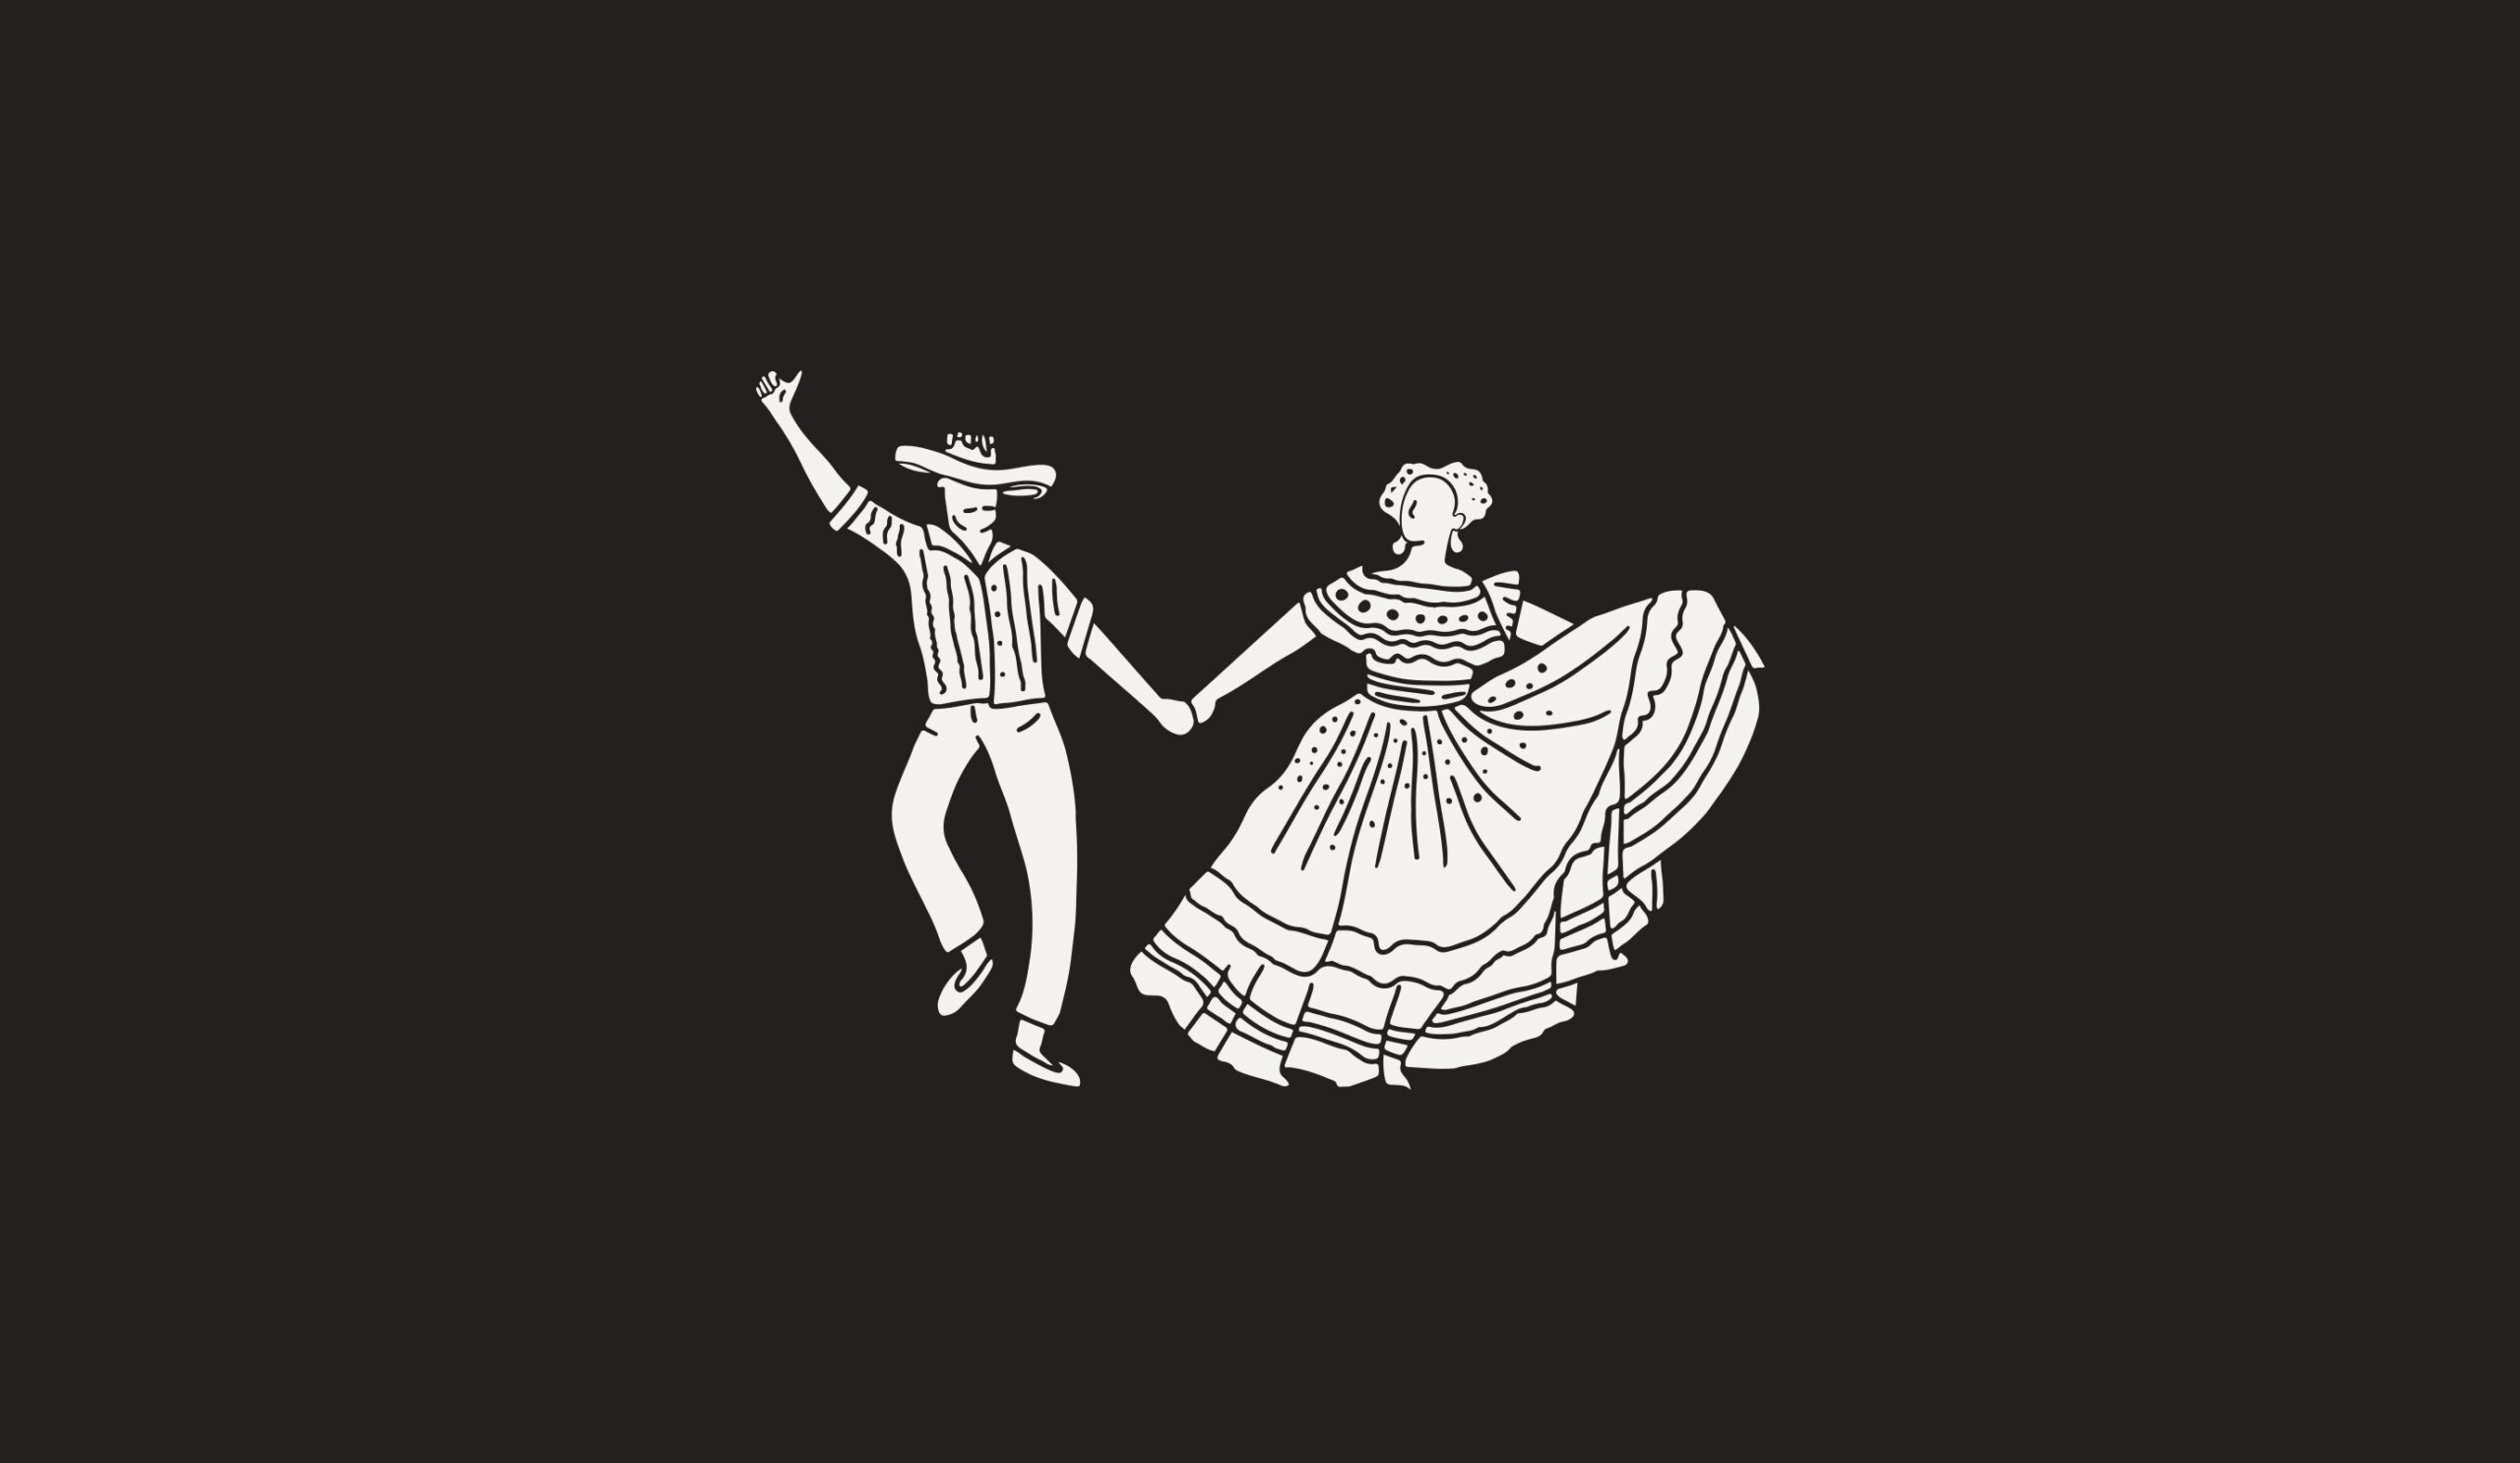 Black & white Illustration of two columbian dancers, one wearing a sombrero vueltiado, button up shirt & rolled up pants, while the other wears a traditional dress with a flowers in their hair.